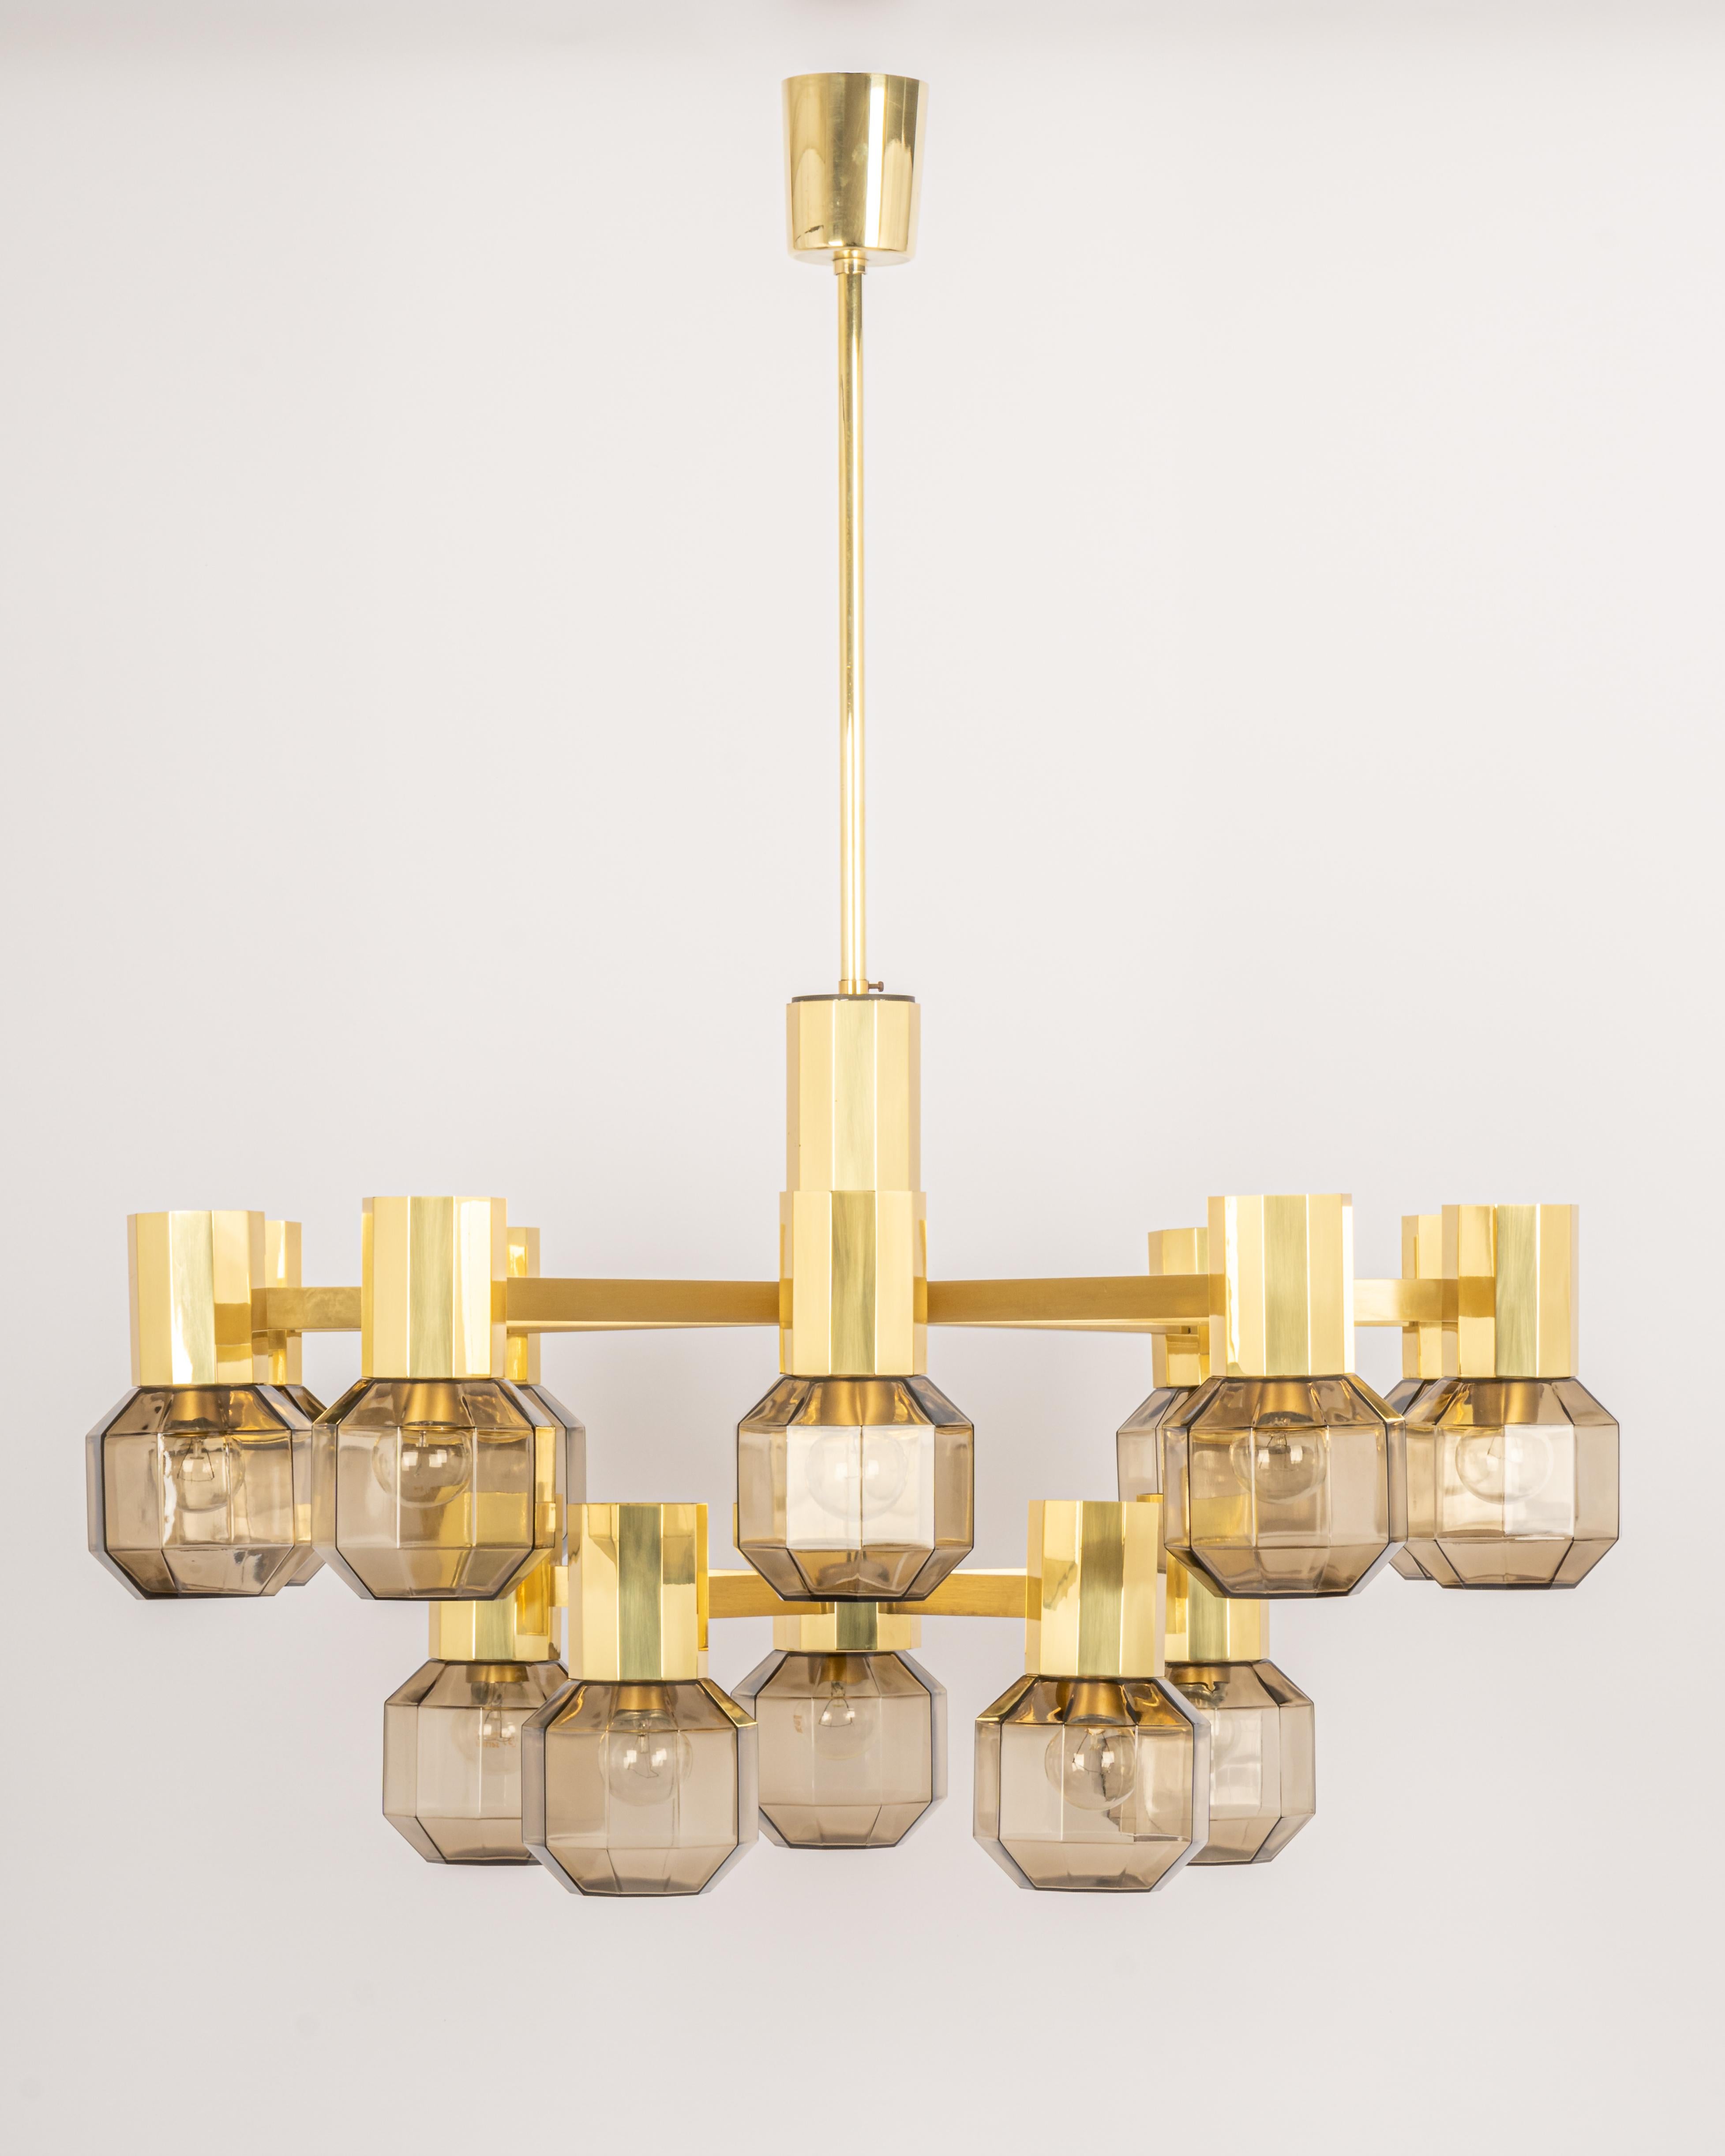 Stunning brass chandelier in the style of Sciolari.
Smoked glass in a very beautiful smokey brown color.
Made with brass, best of the 1970s.

High quality and in very good condition. Cleaned, well-wired and ready to use. 

The fixture requires